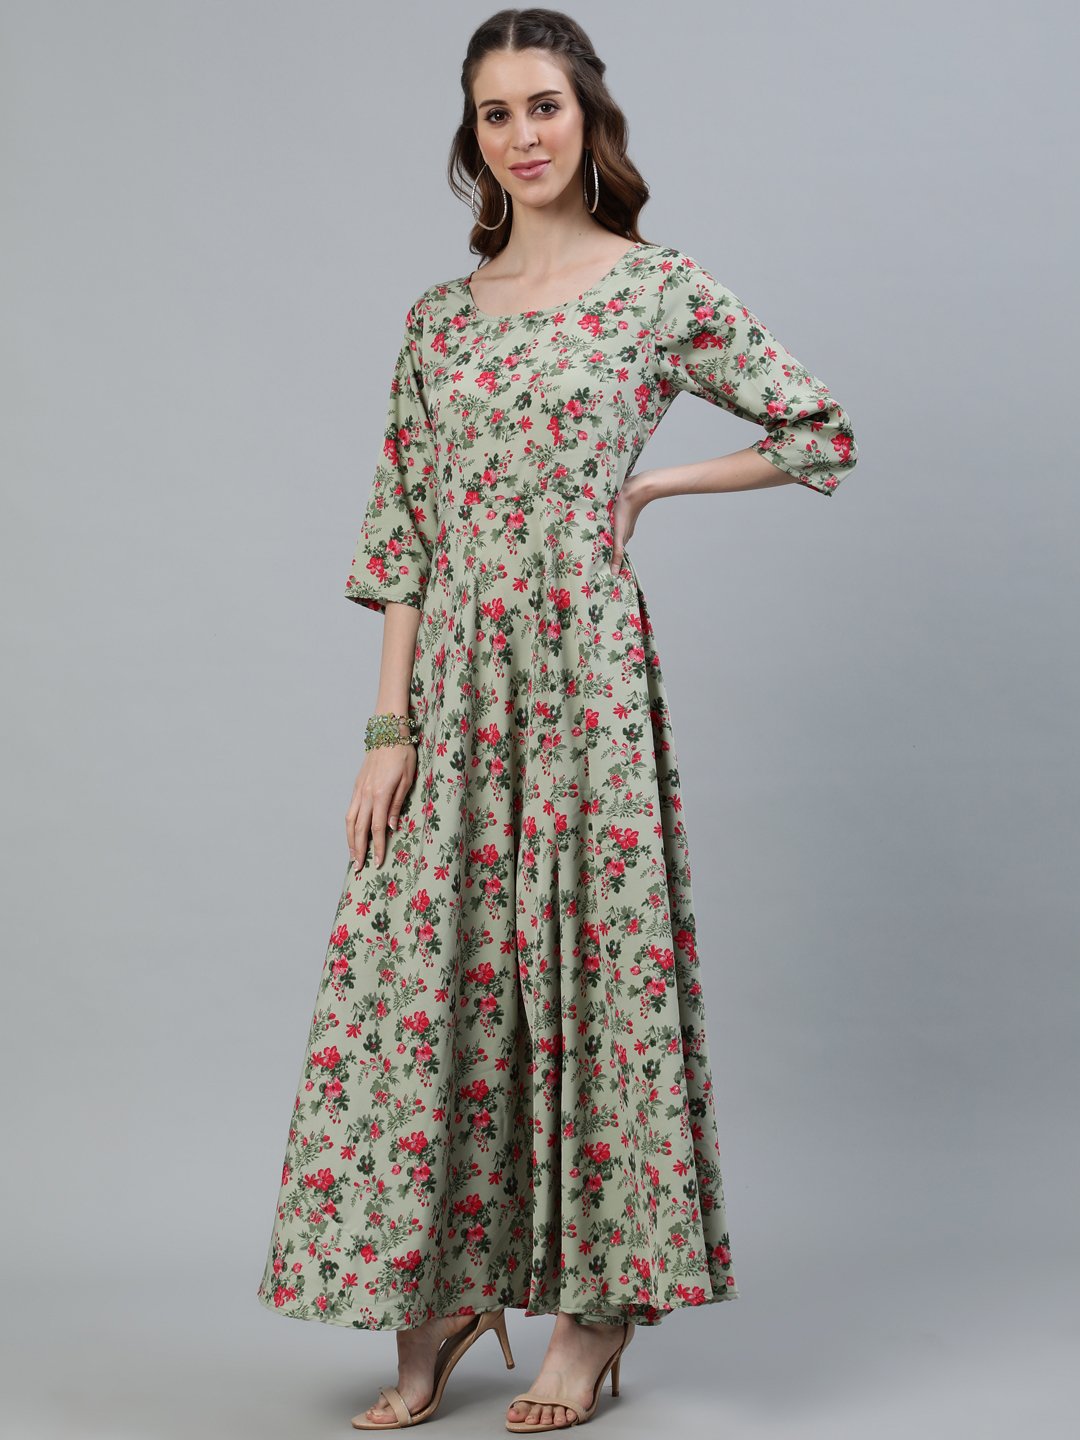 Women's Green Floral Printed Maxi Dress With Three Quarter Sleeves - Nayo Clothing